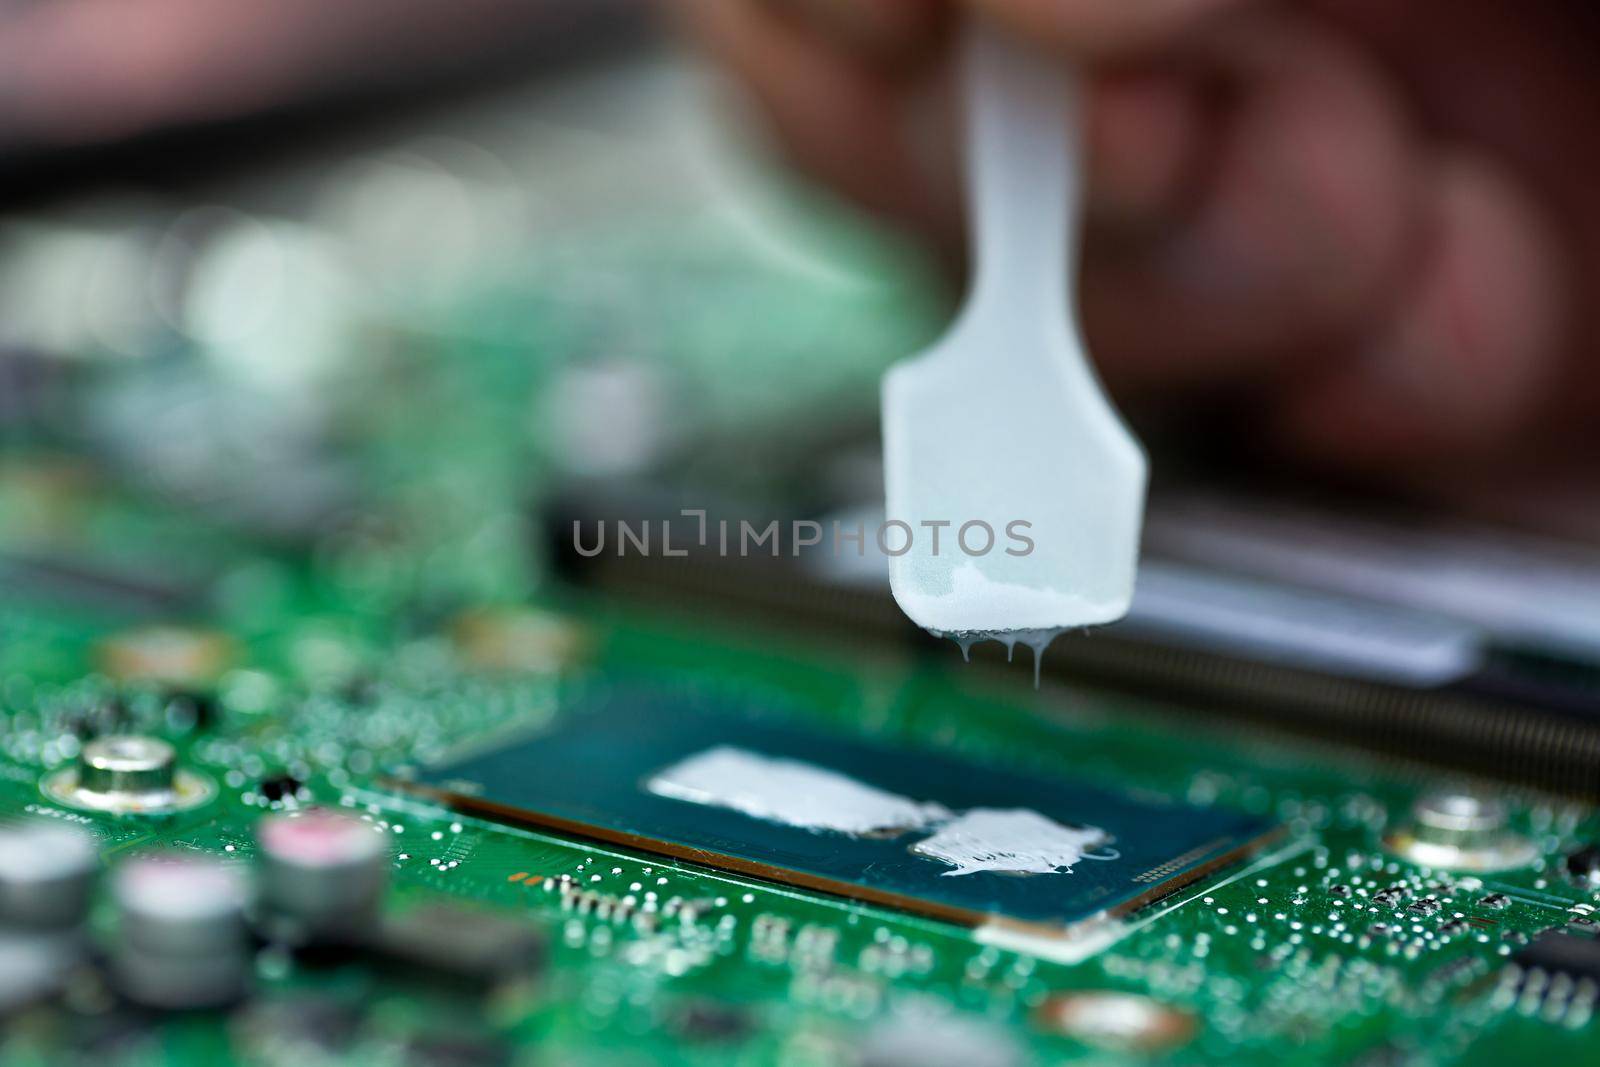 Thermal paste is applied to the laptop processor